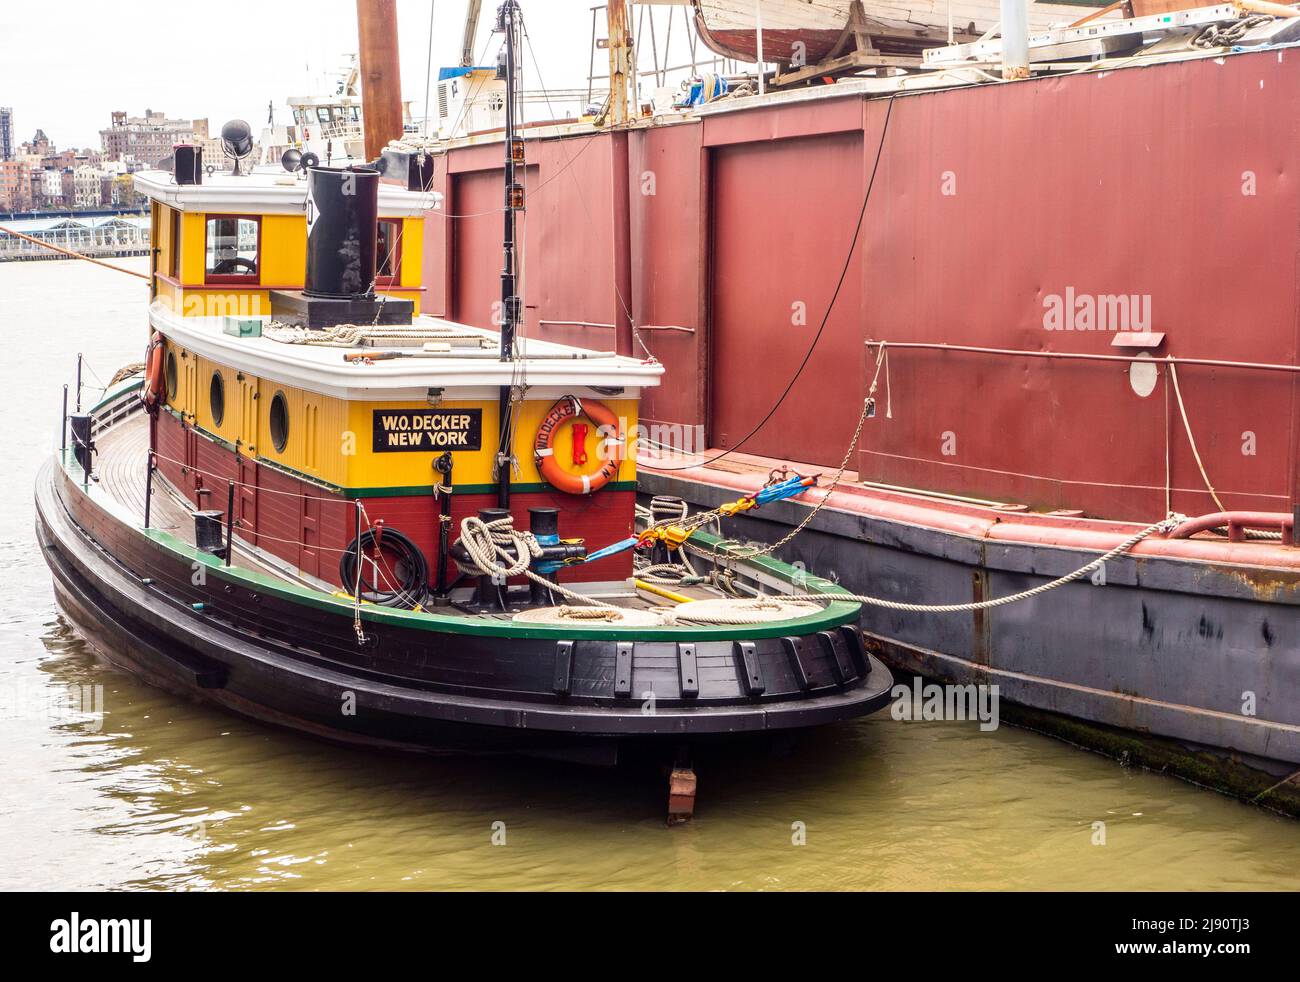 W.O. Decker, historic wooden tugboat at the South Street Seaport, New York City, New York, USA Stock Photo